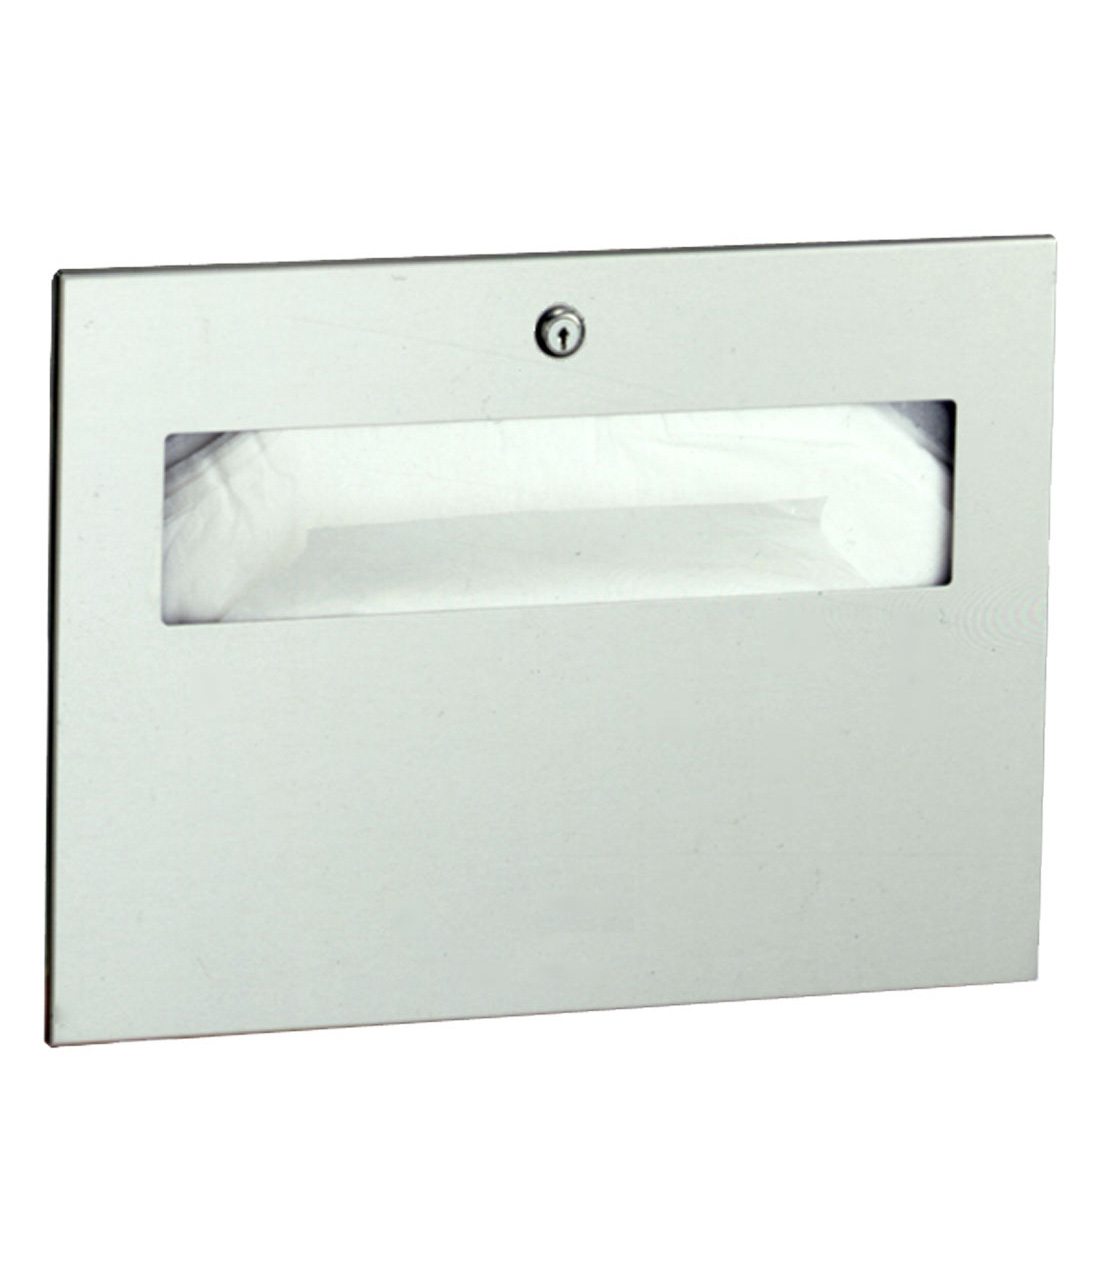 Recessed Coverall Toilet Seat-Cover Dispenser - (Model #: tsc-8) Image